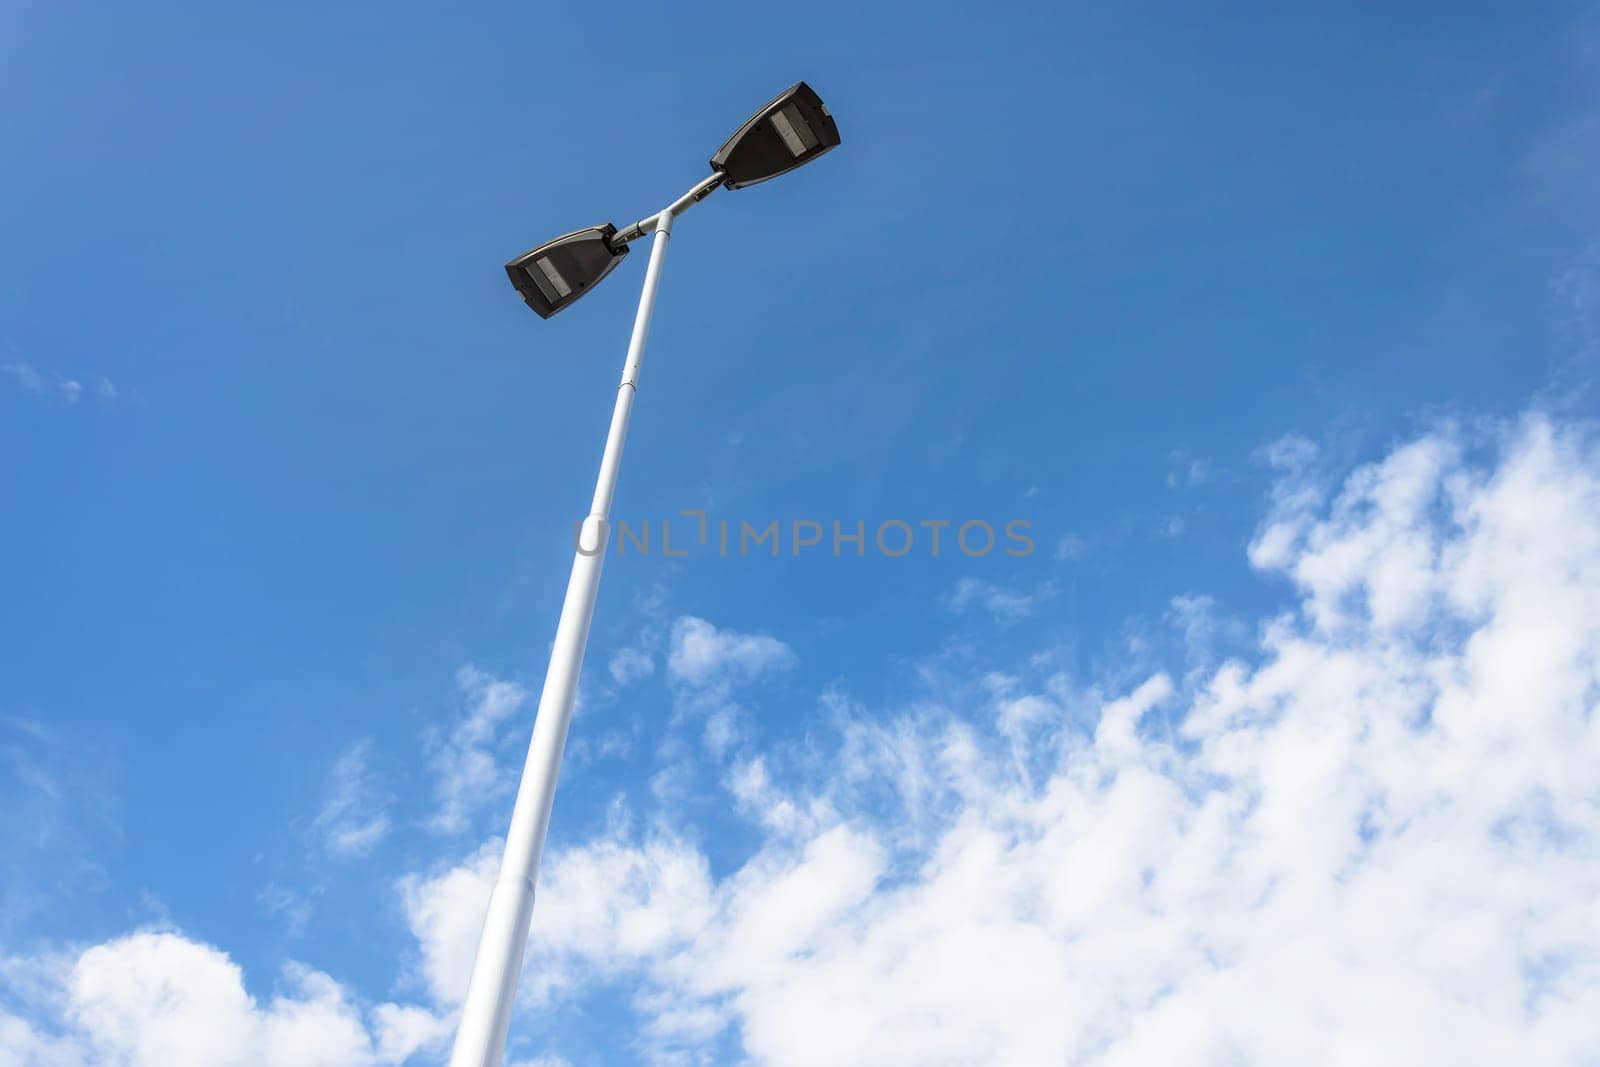 LED lantern for street lighting. Modern street lamp on a metal pole against the blue sky with white clouds. Modern LED lamp street lighting.